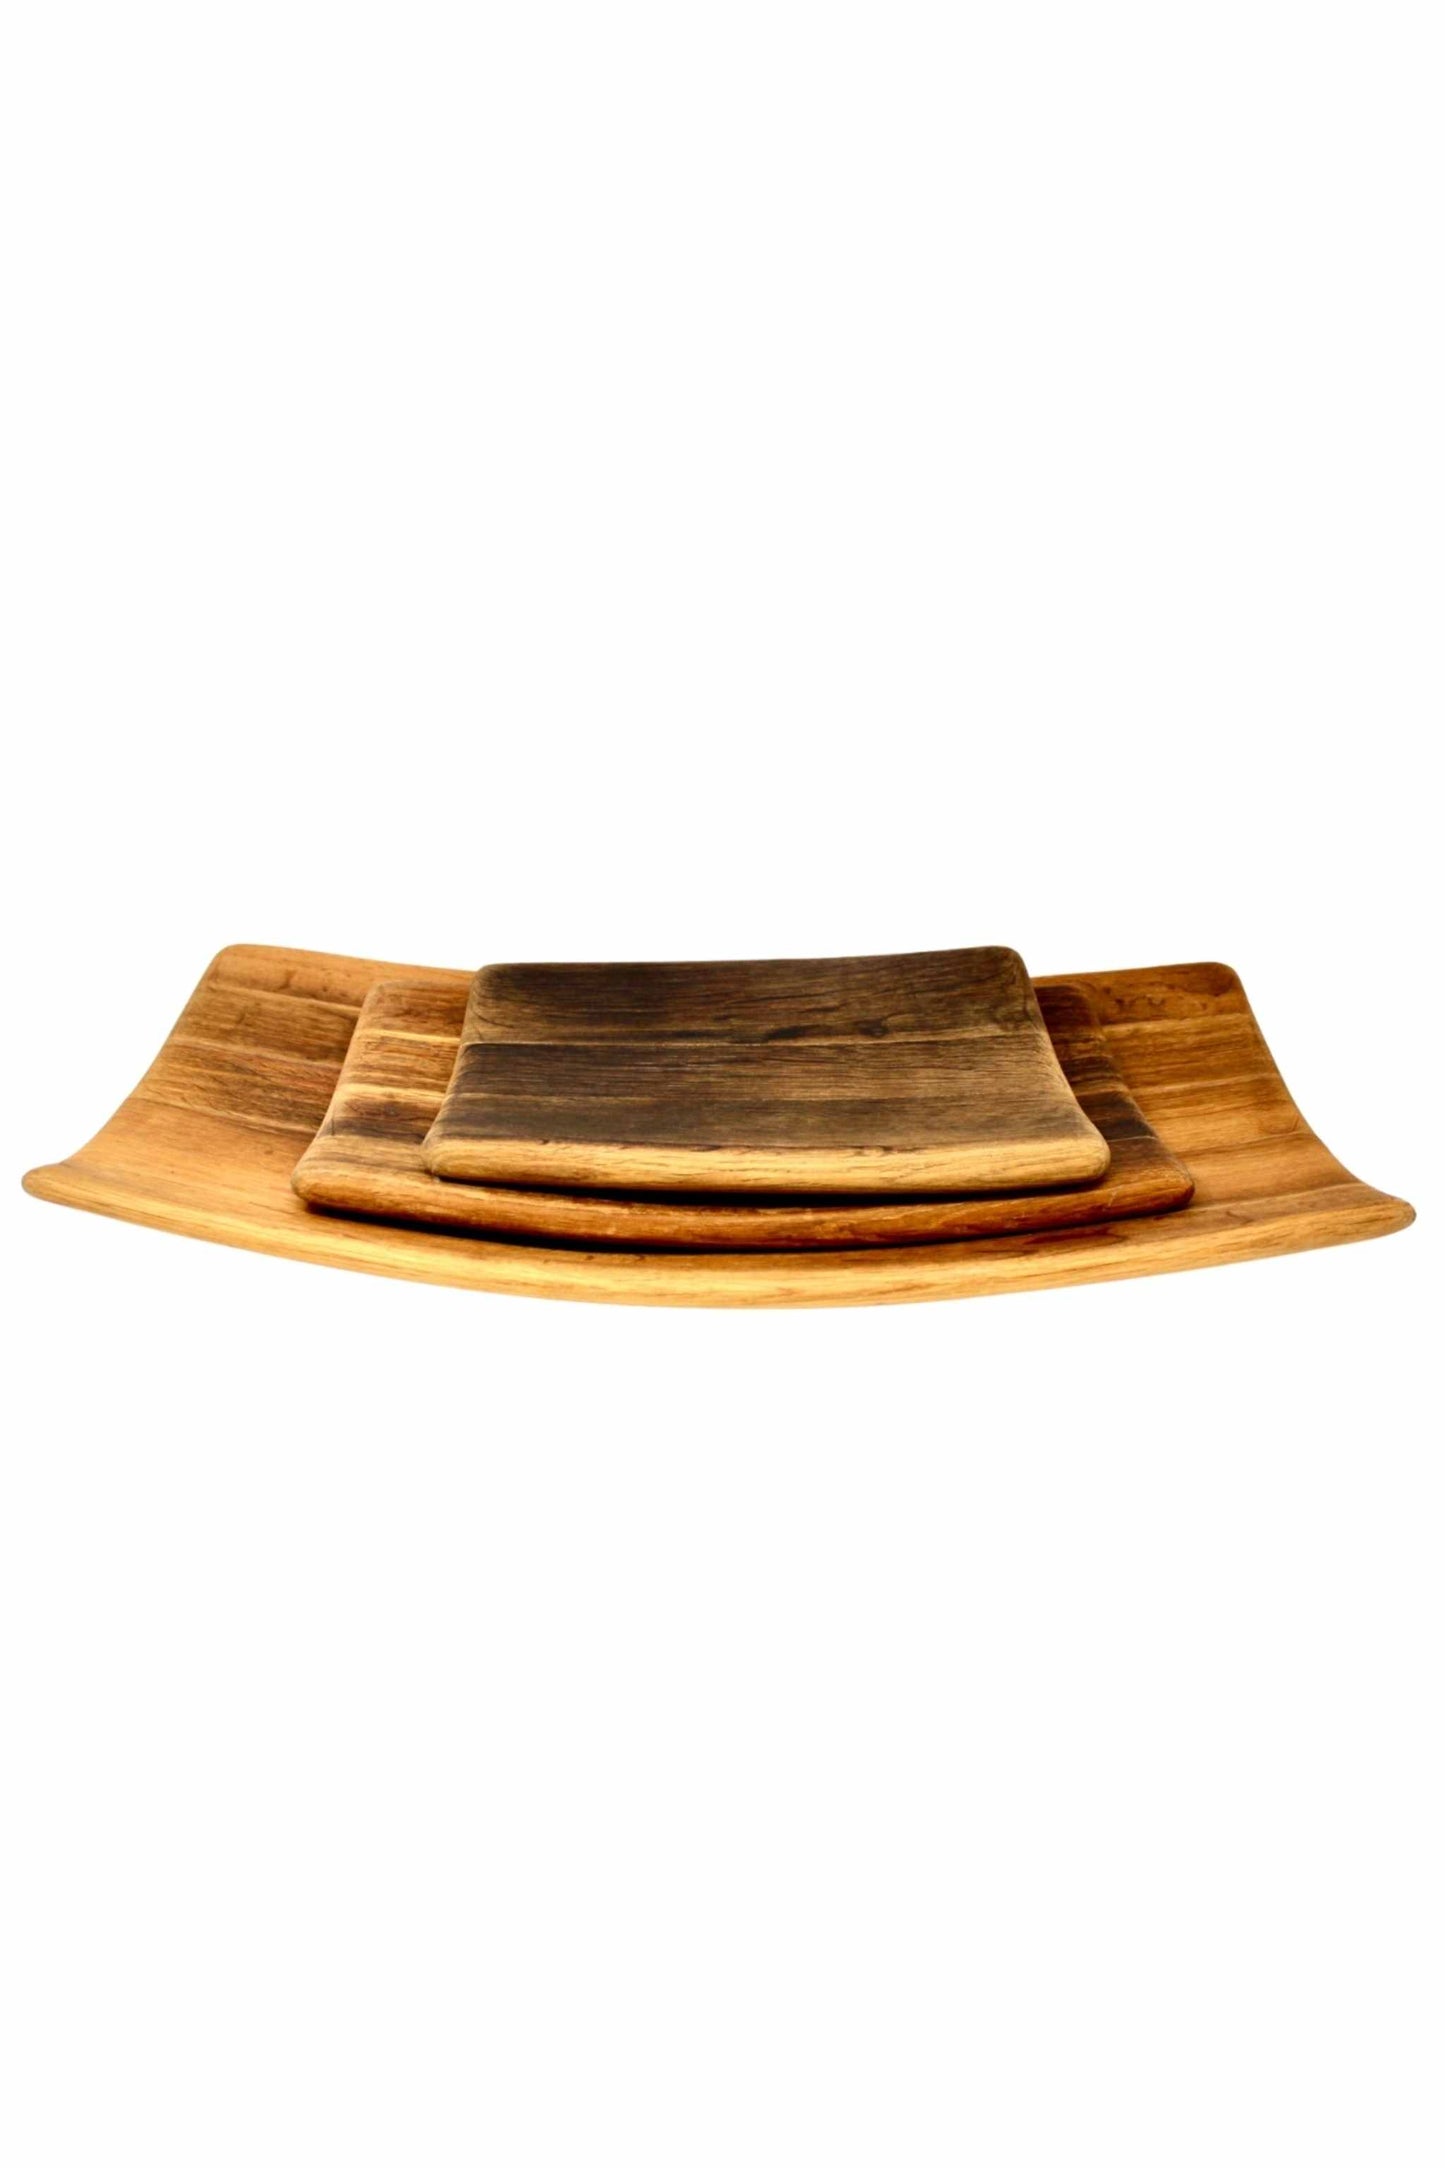 Three sizes of wine barrel platters grouped together. 